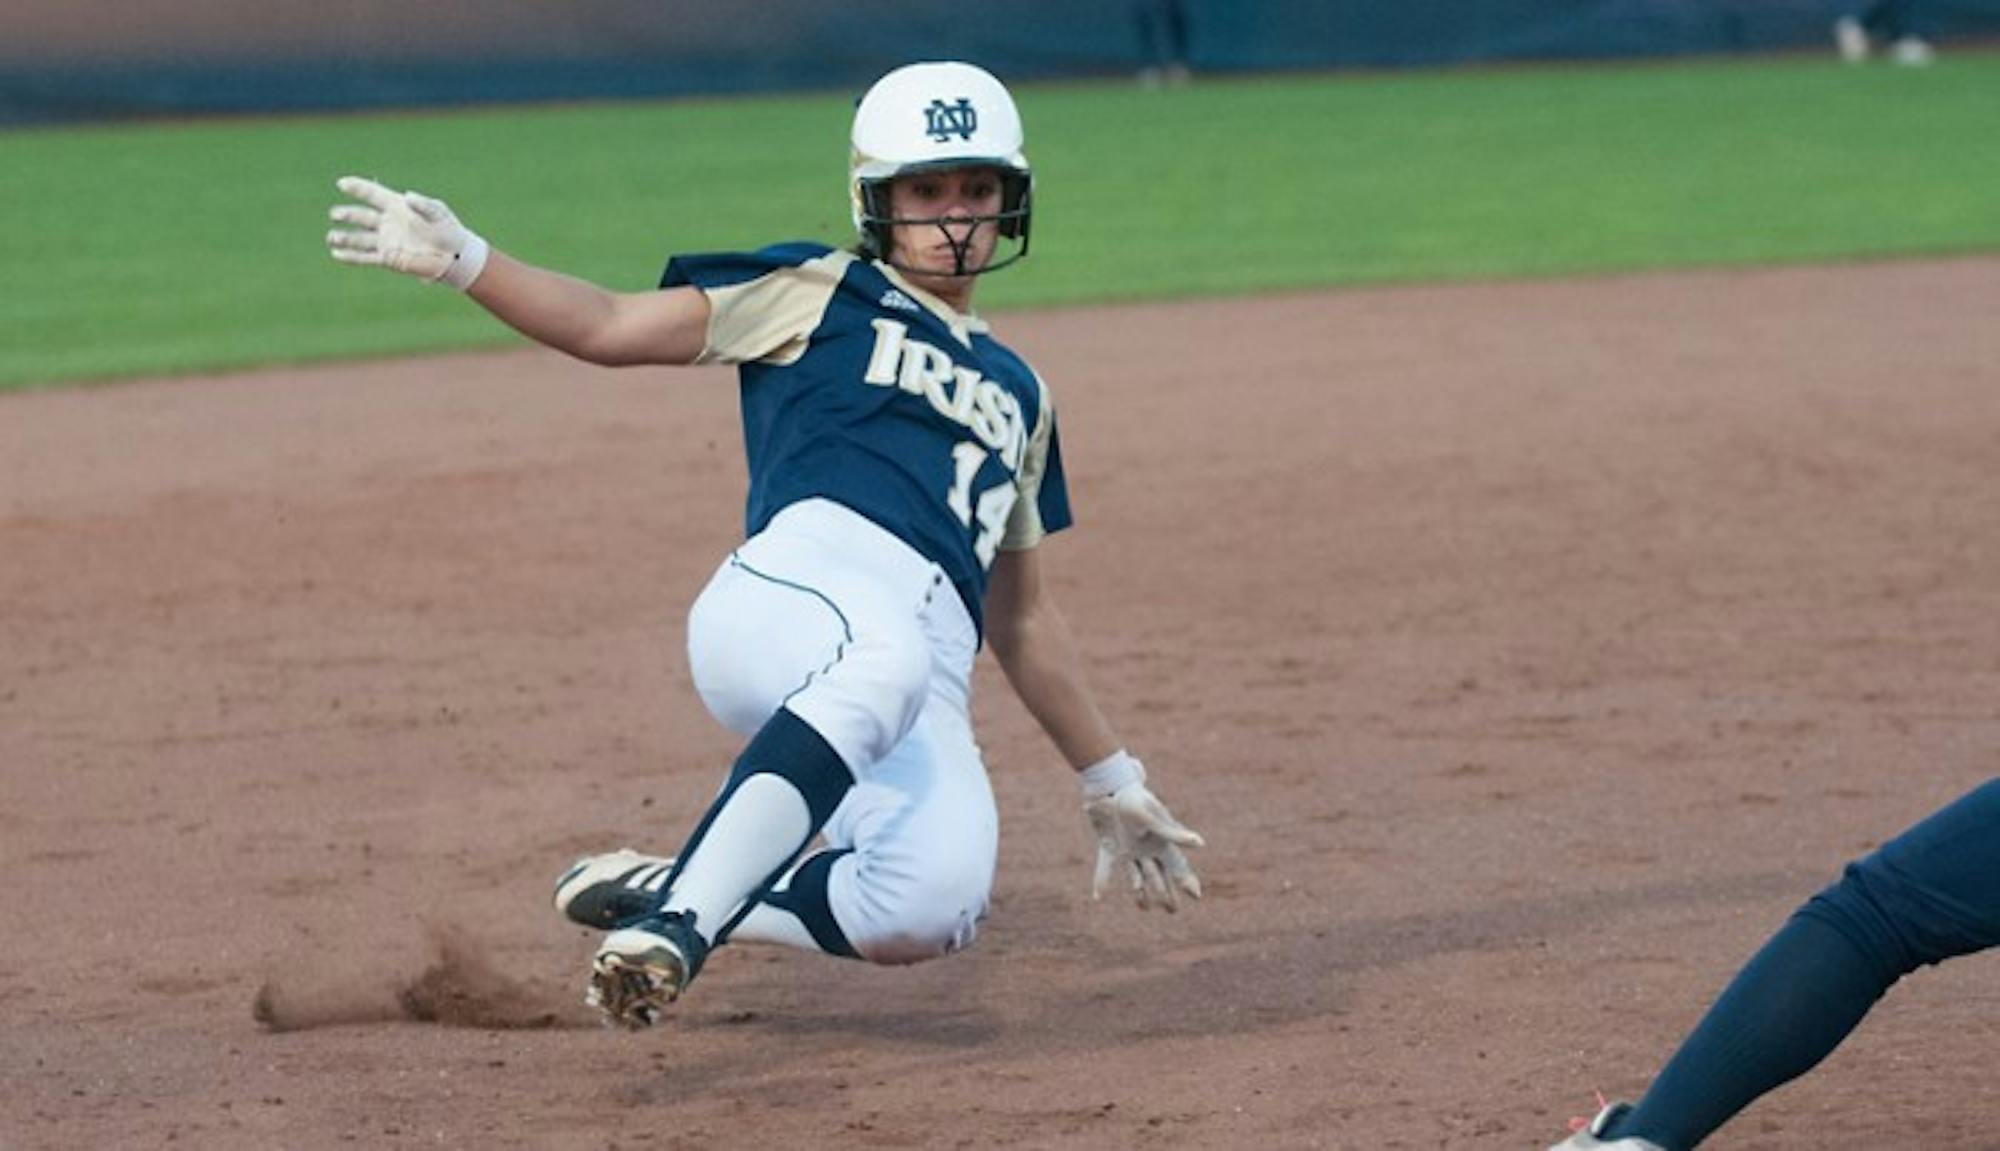 Irish senior outfielder Monica Torres slides into third base ahead of the throw during a scrimmage on Oct. 9, 2013.